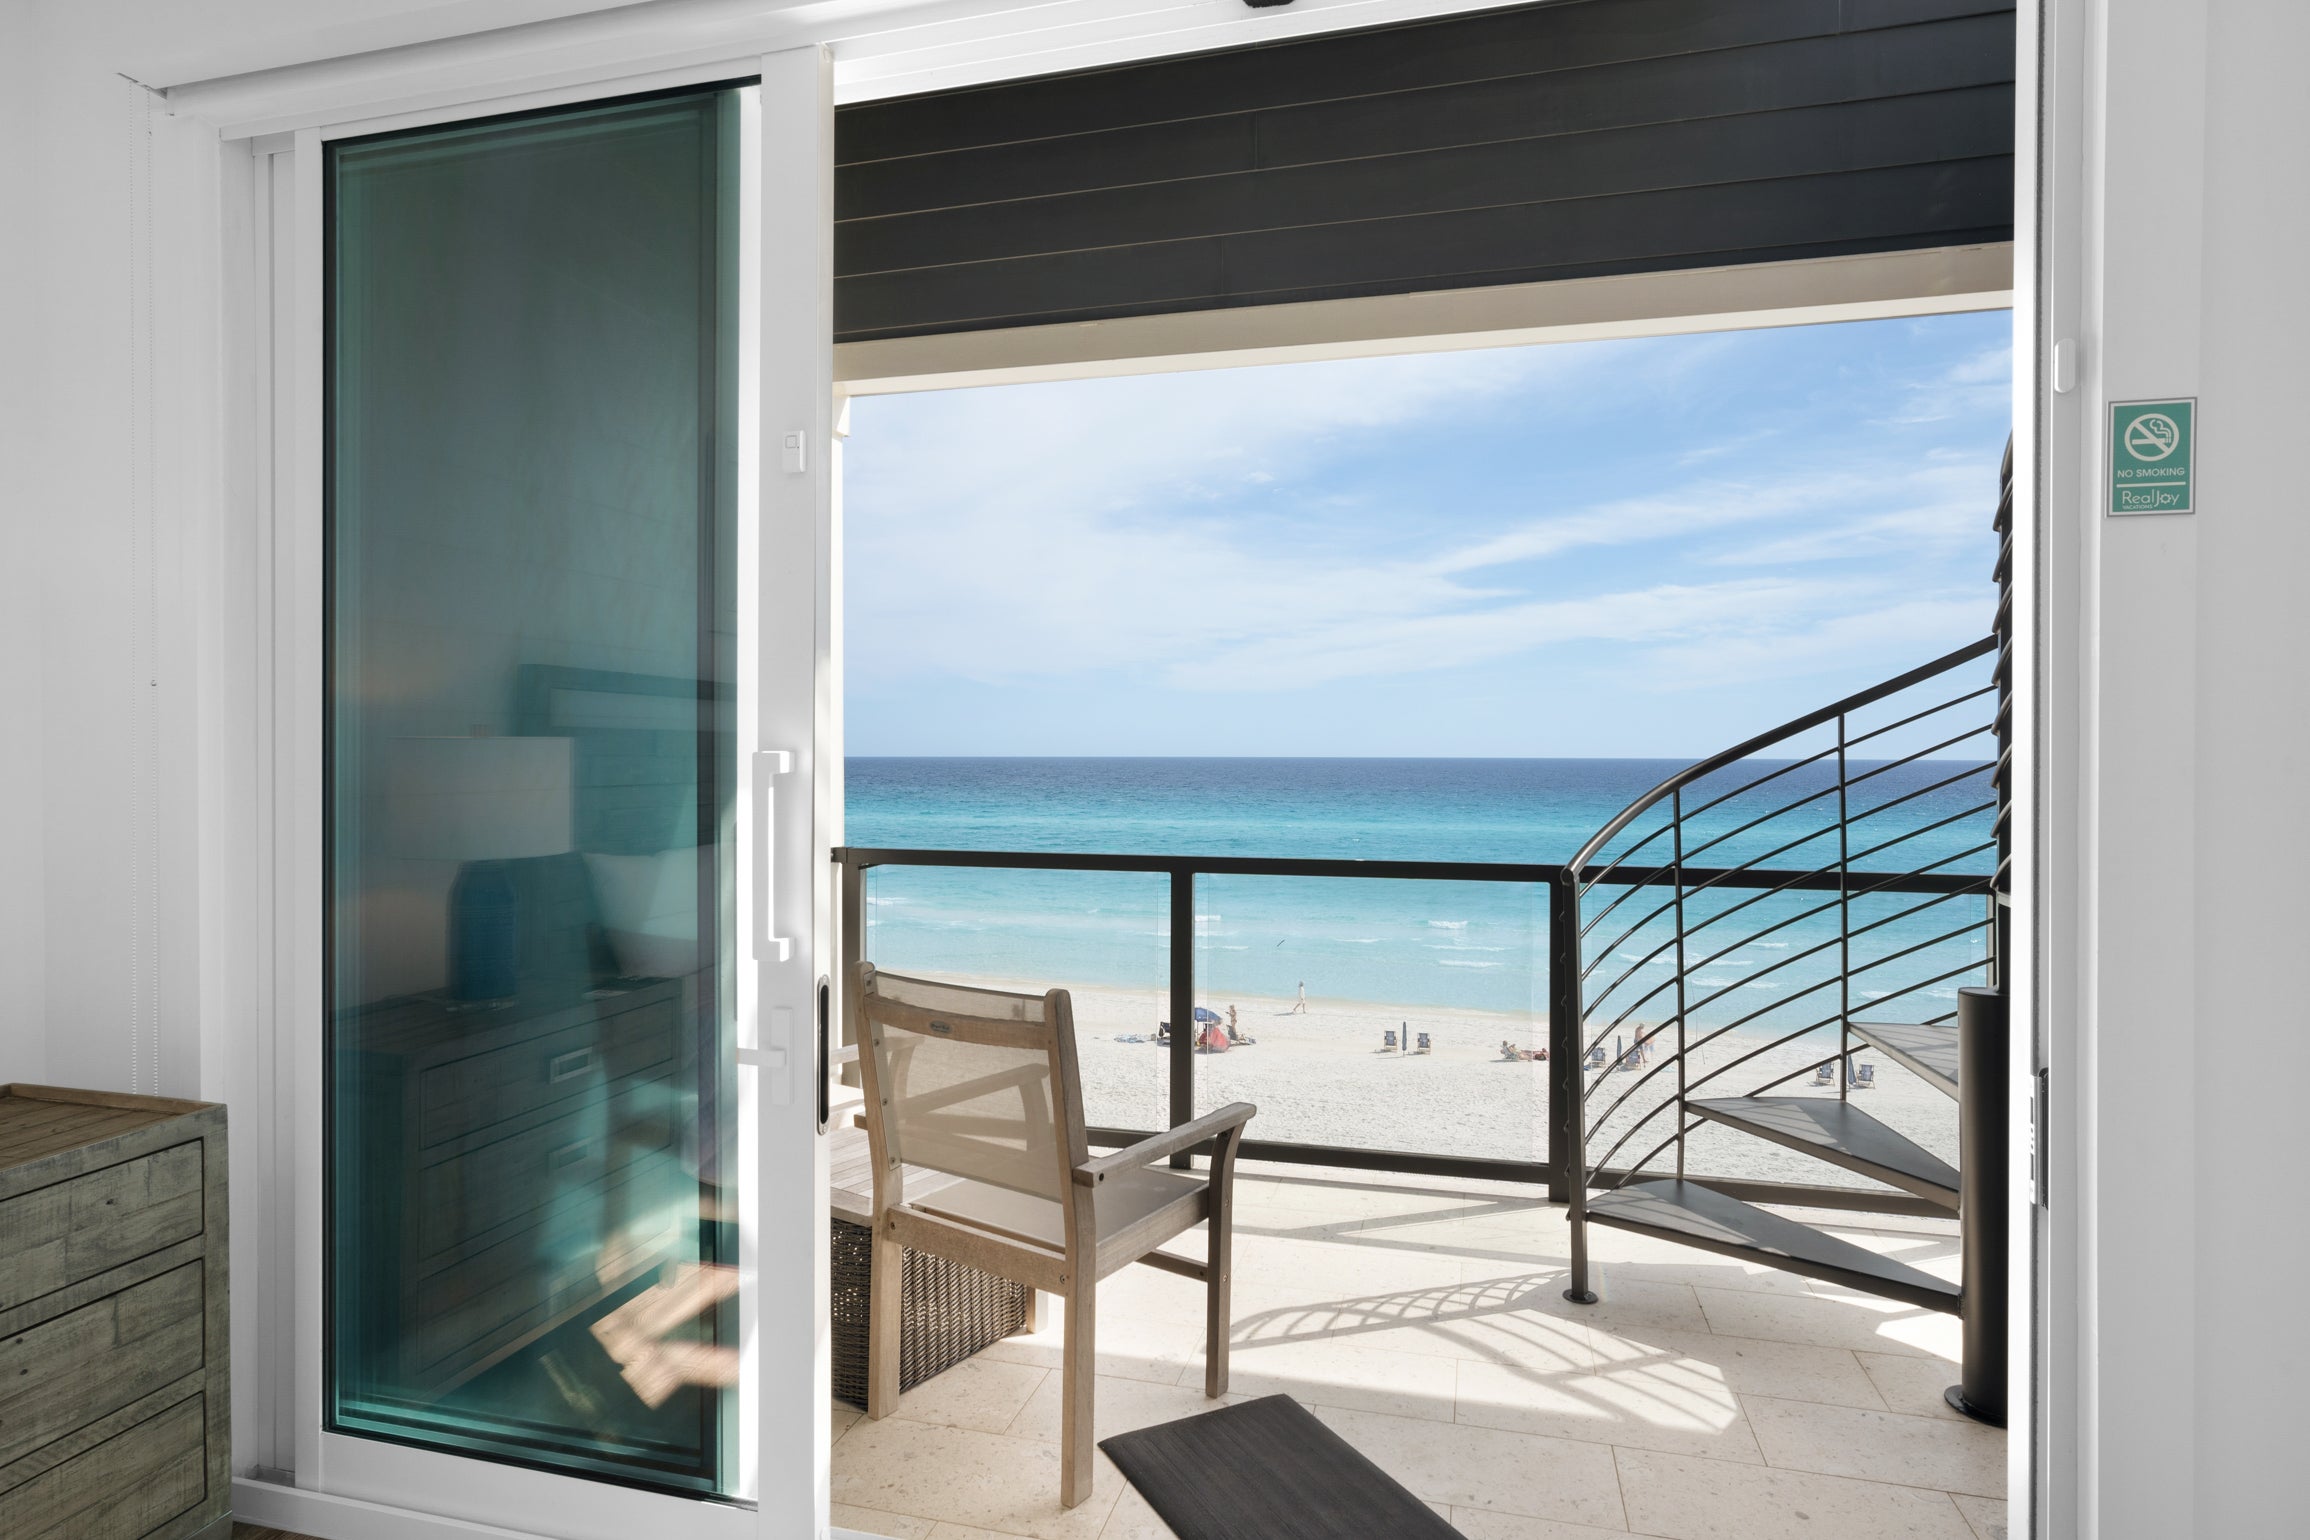 Step out on the balcony and head up to the pool